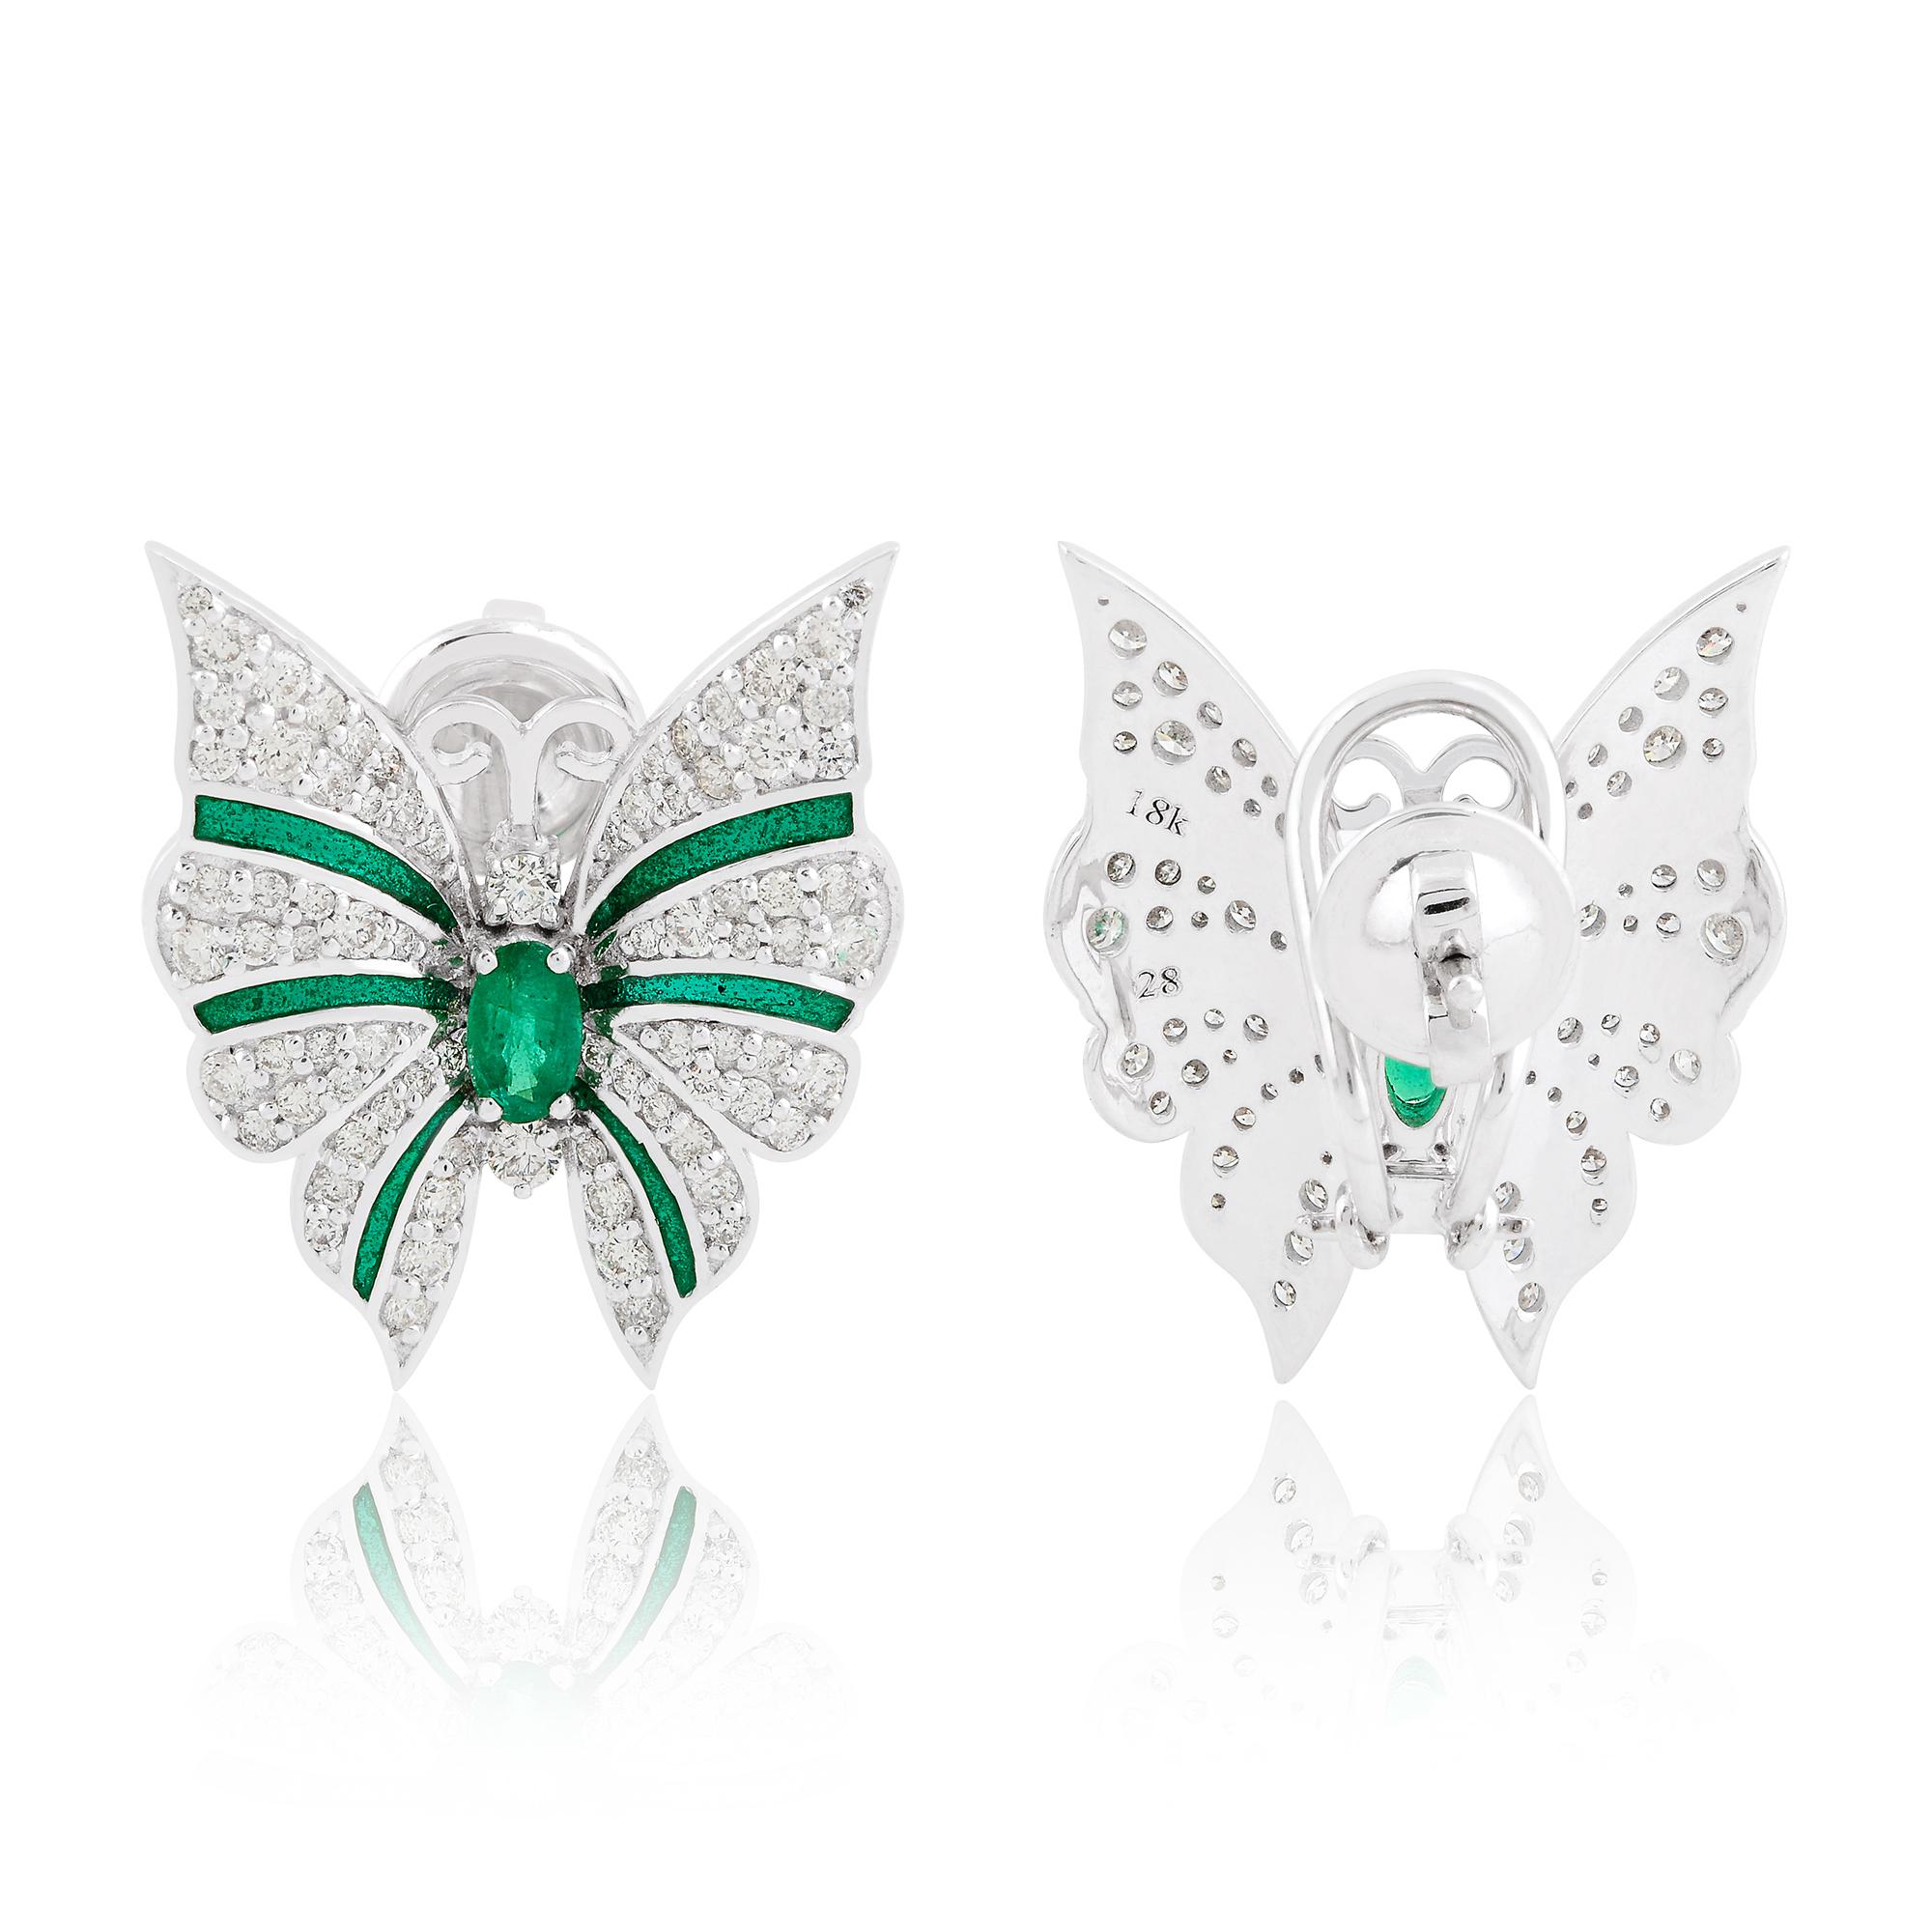 Cast from 18-karat gold, these exquisite earrings are handset with 0.55 carats Zambian emerald & 1.30 carats of sparkling diamonds.

FOLLOW SPECTRUM JEWELS storefront to view the latest collection & exclusive pieces. Spectrum Jewels is proudly rated